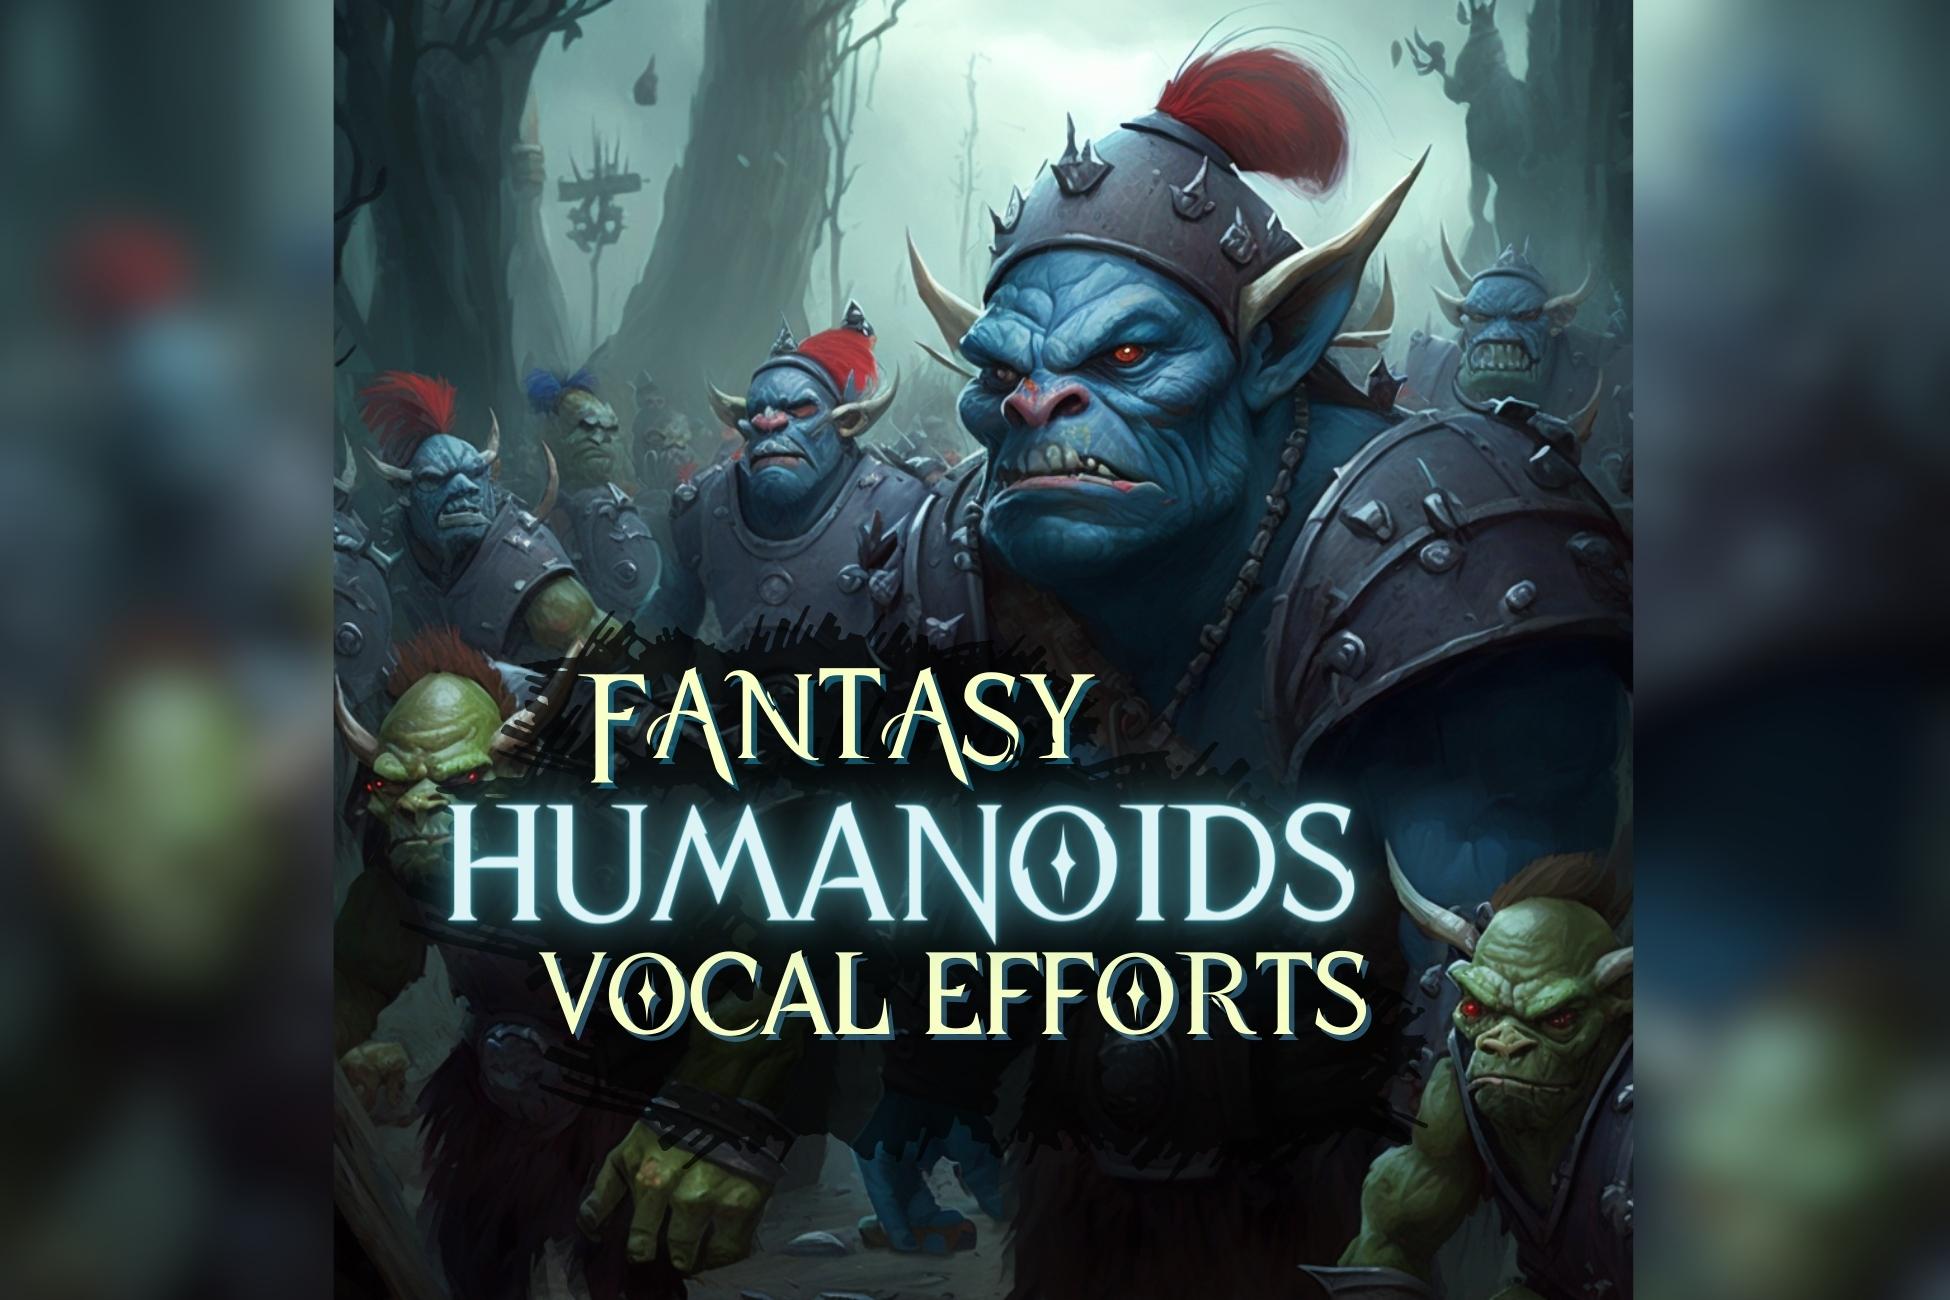 Fantasy Character Voices - Humanoid Vocal Efforts Sound Pack